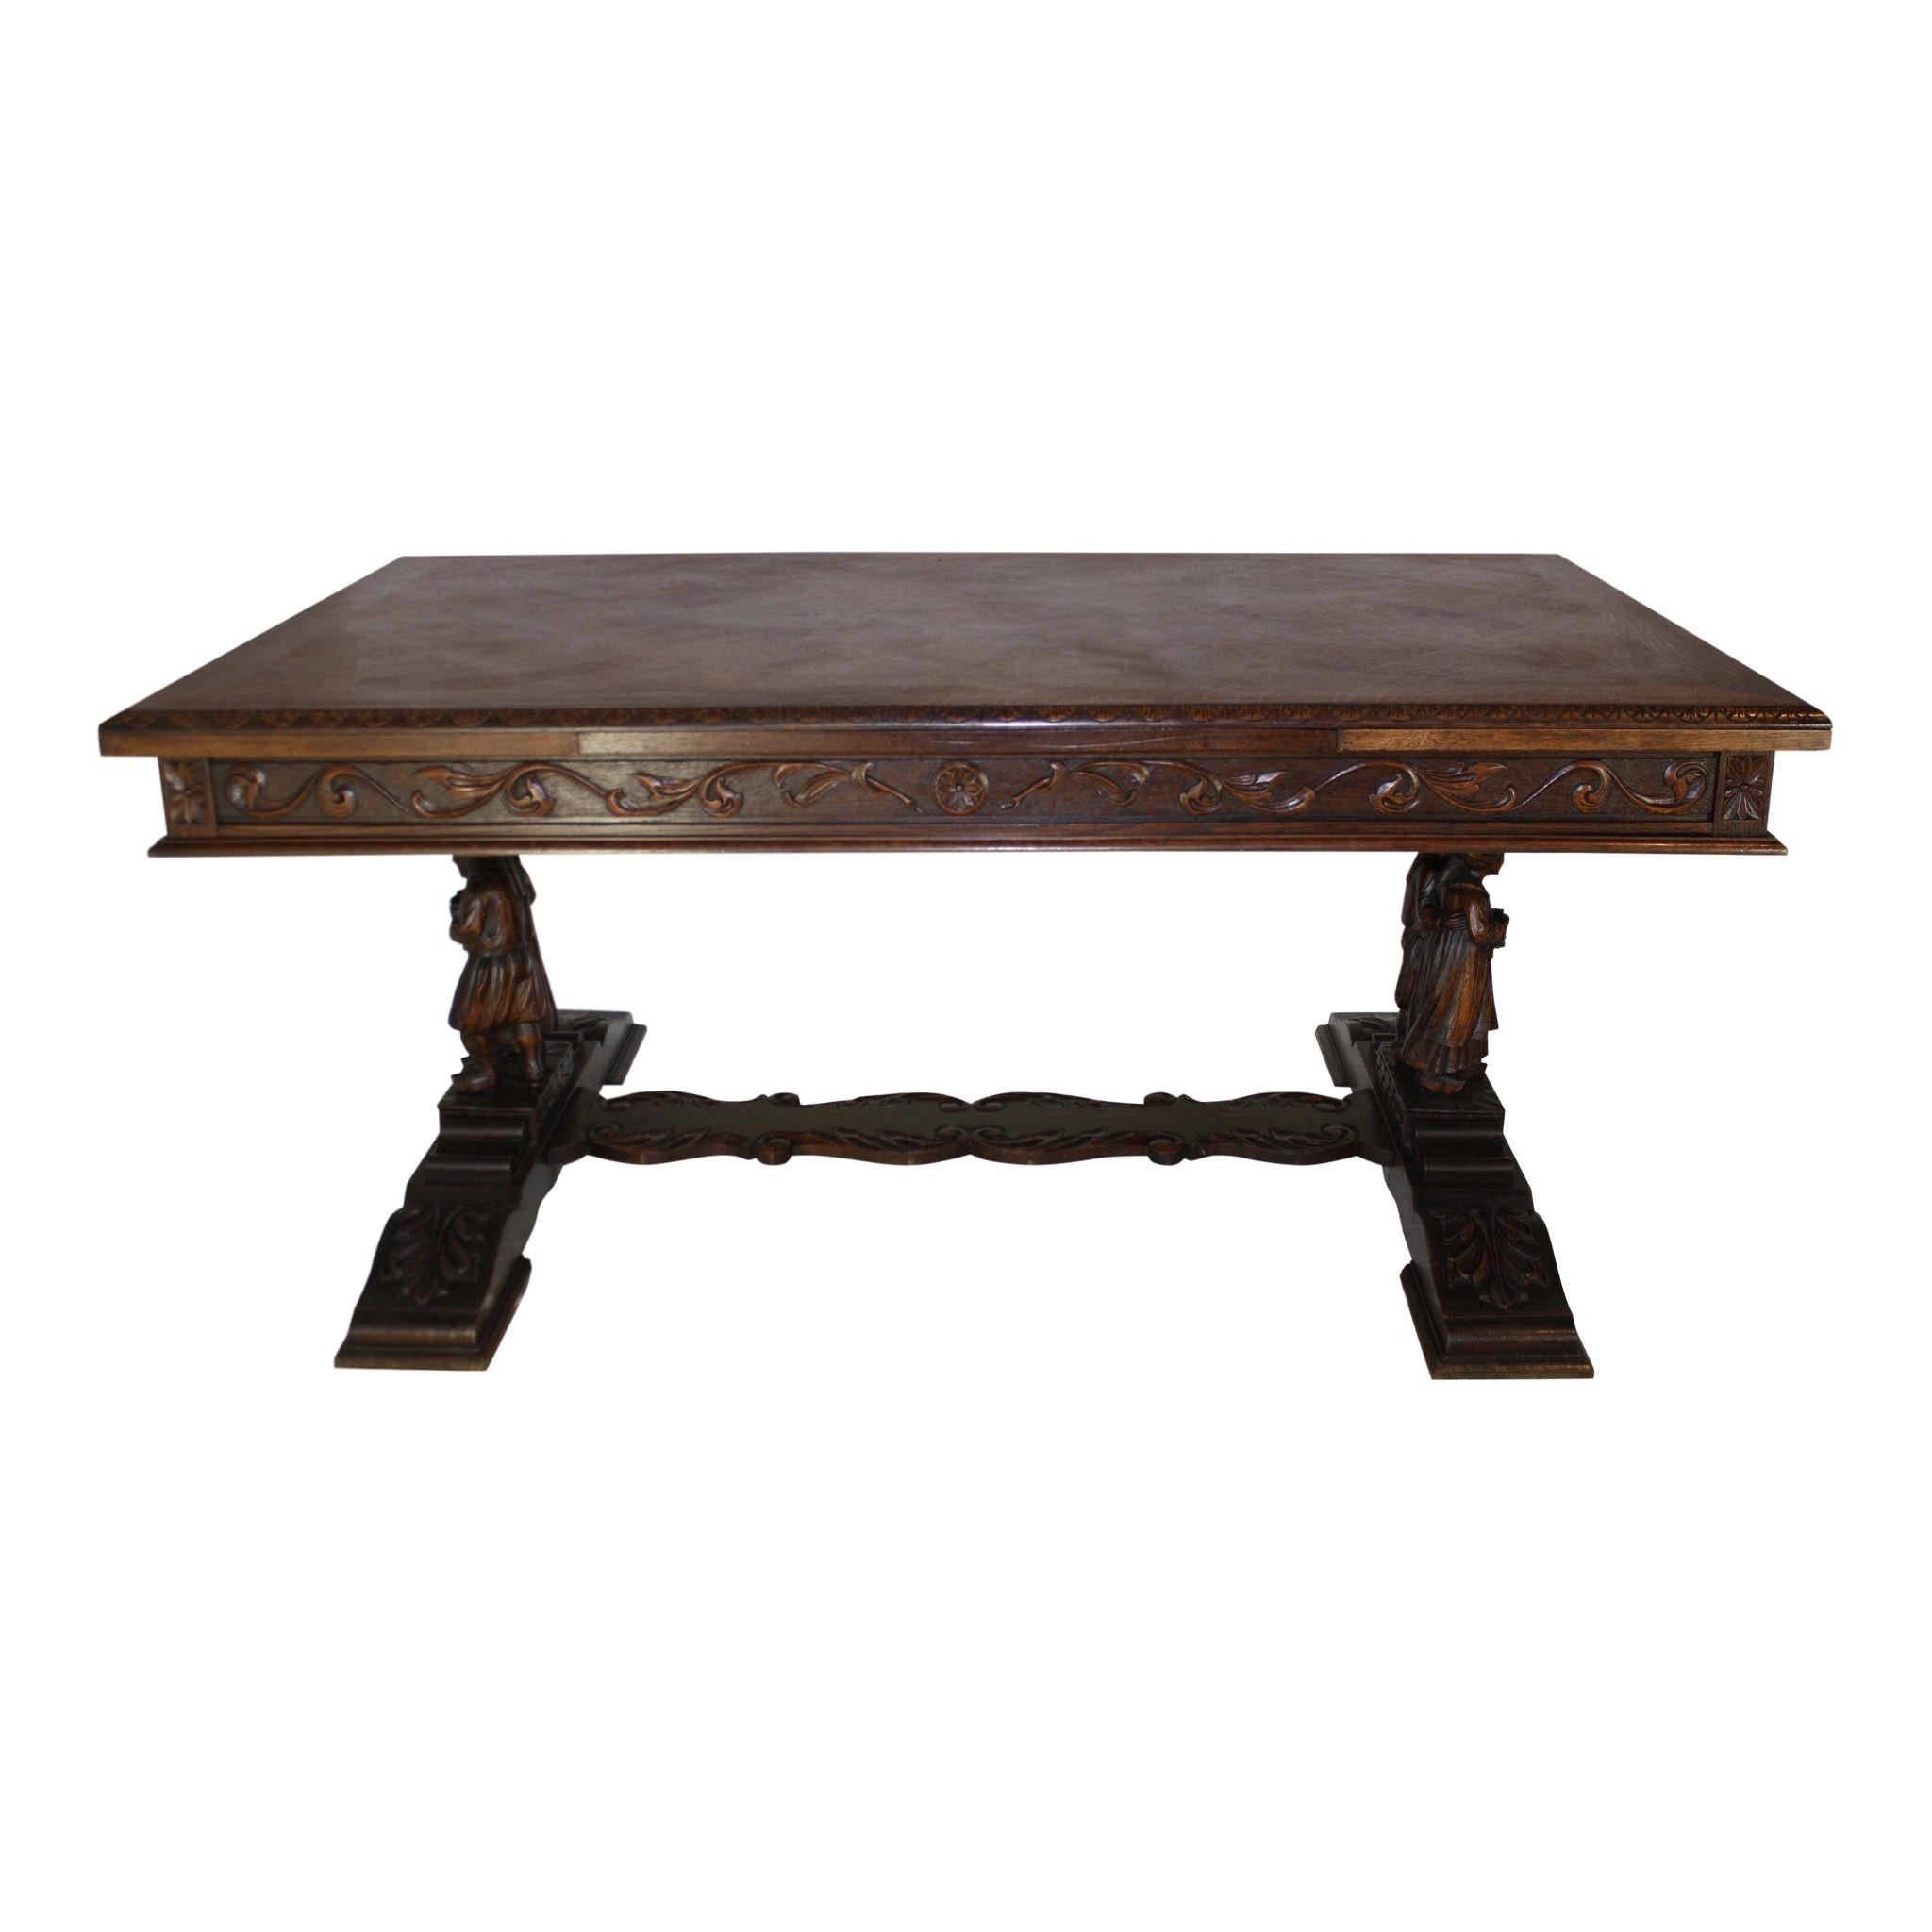 Hand-Carved Belgian Draw Leaf Table with Six Chairs, circa 1910